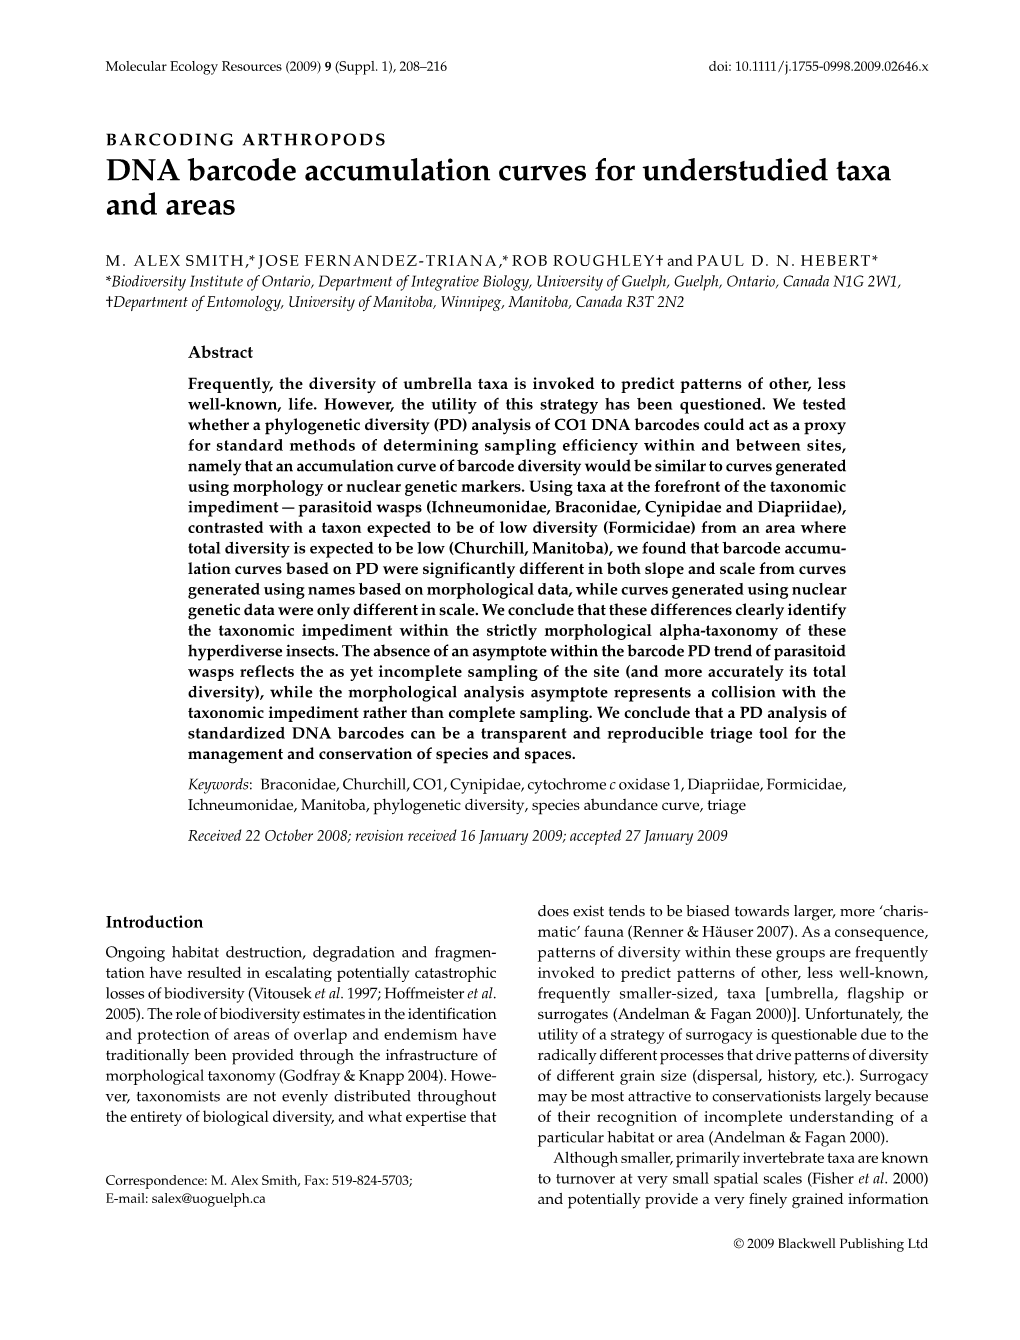 DNA Barcode Accumulation Curves for Understudied Taxa and Areas